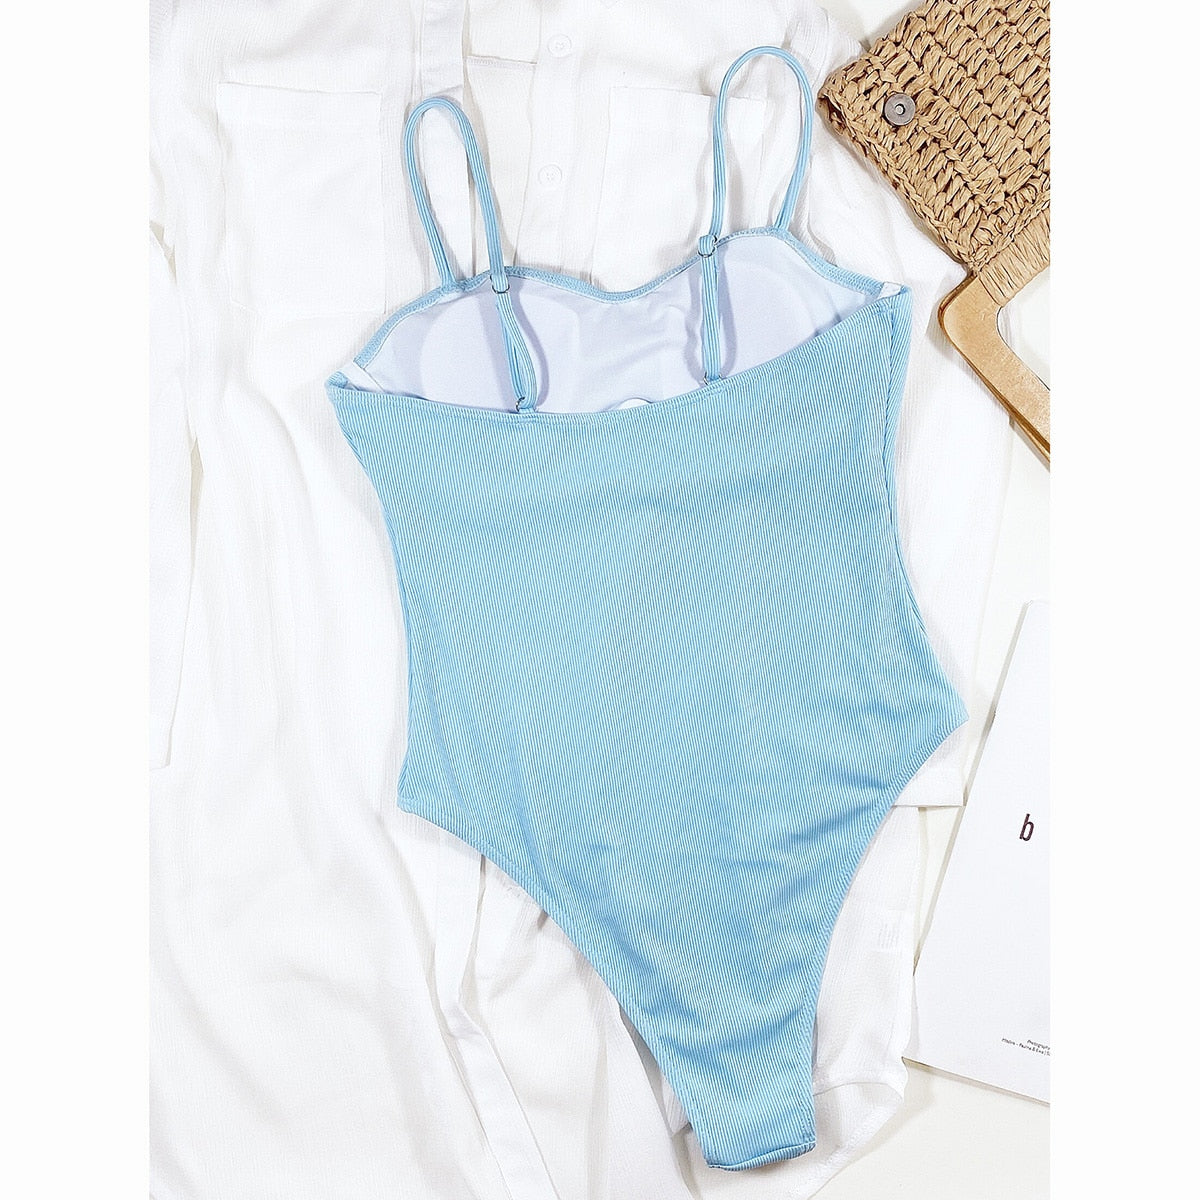 One Piece Swimsuit Solid Blue Swimwear Thong Bathing Suit Monokini Bathing Suit Swimming Suits Beachwear The Clothing Company Sydney